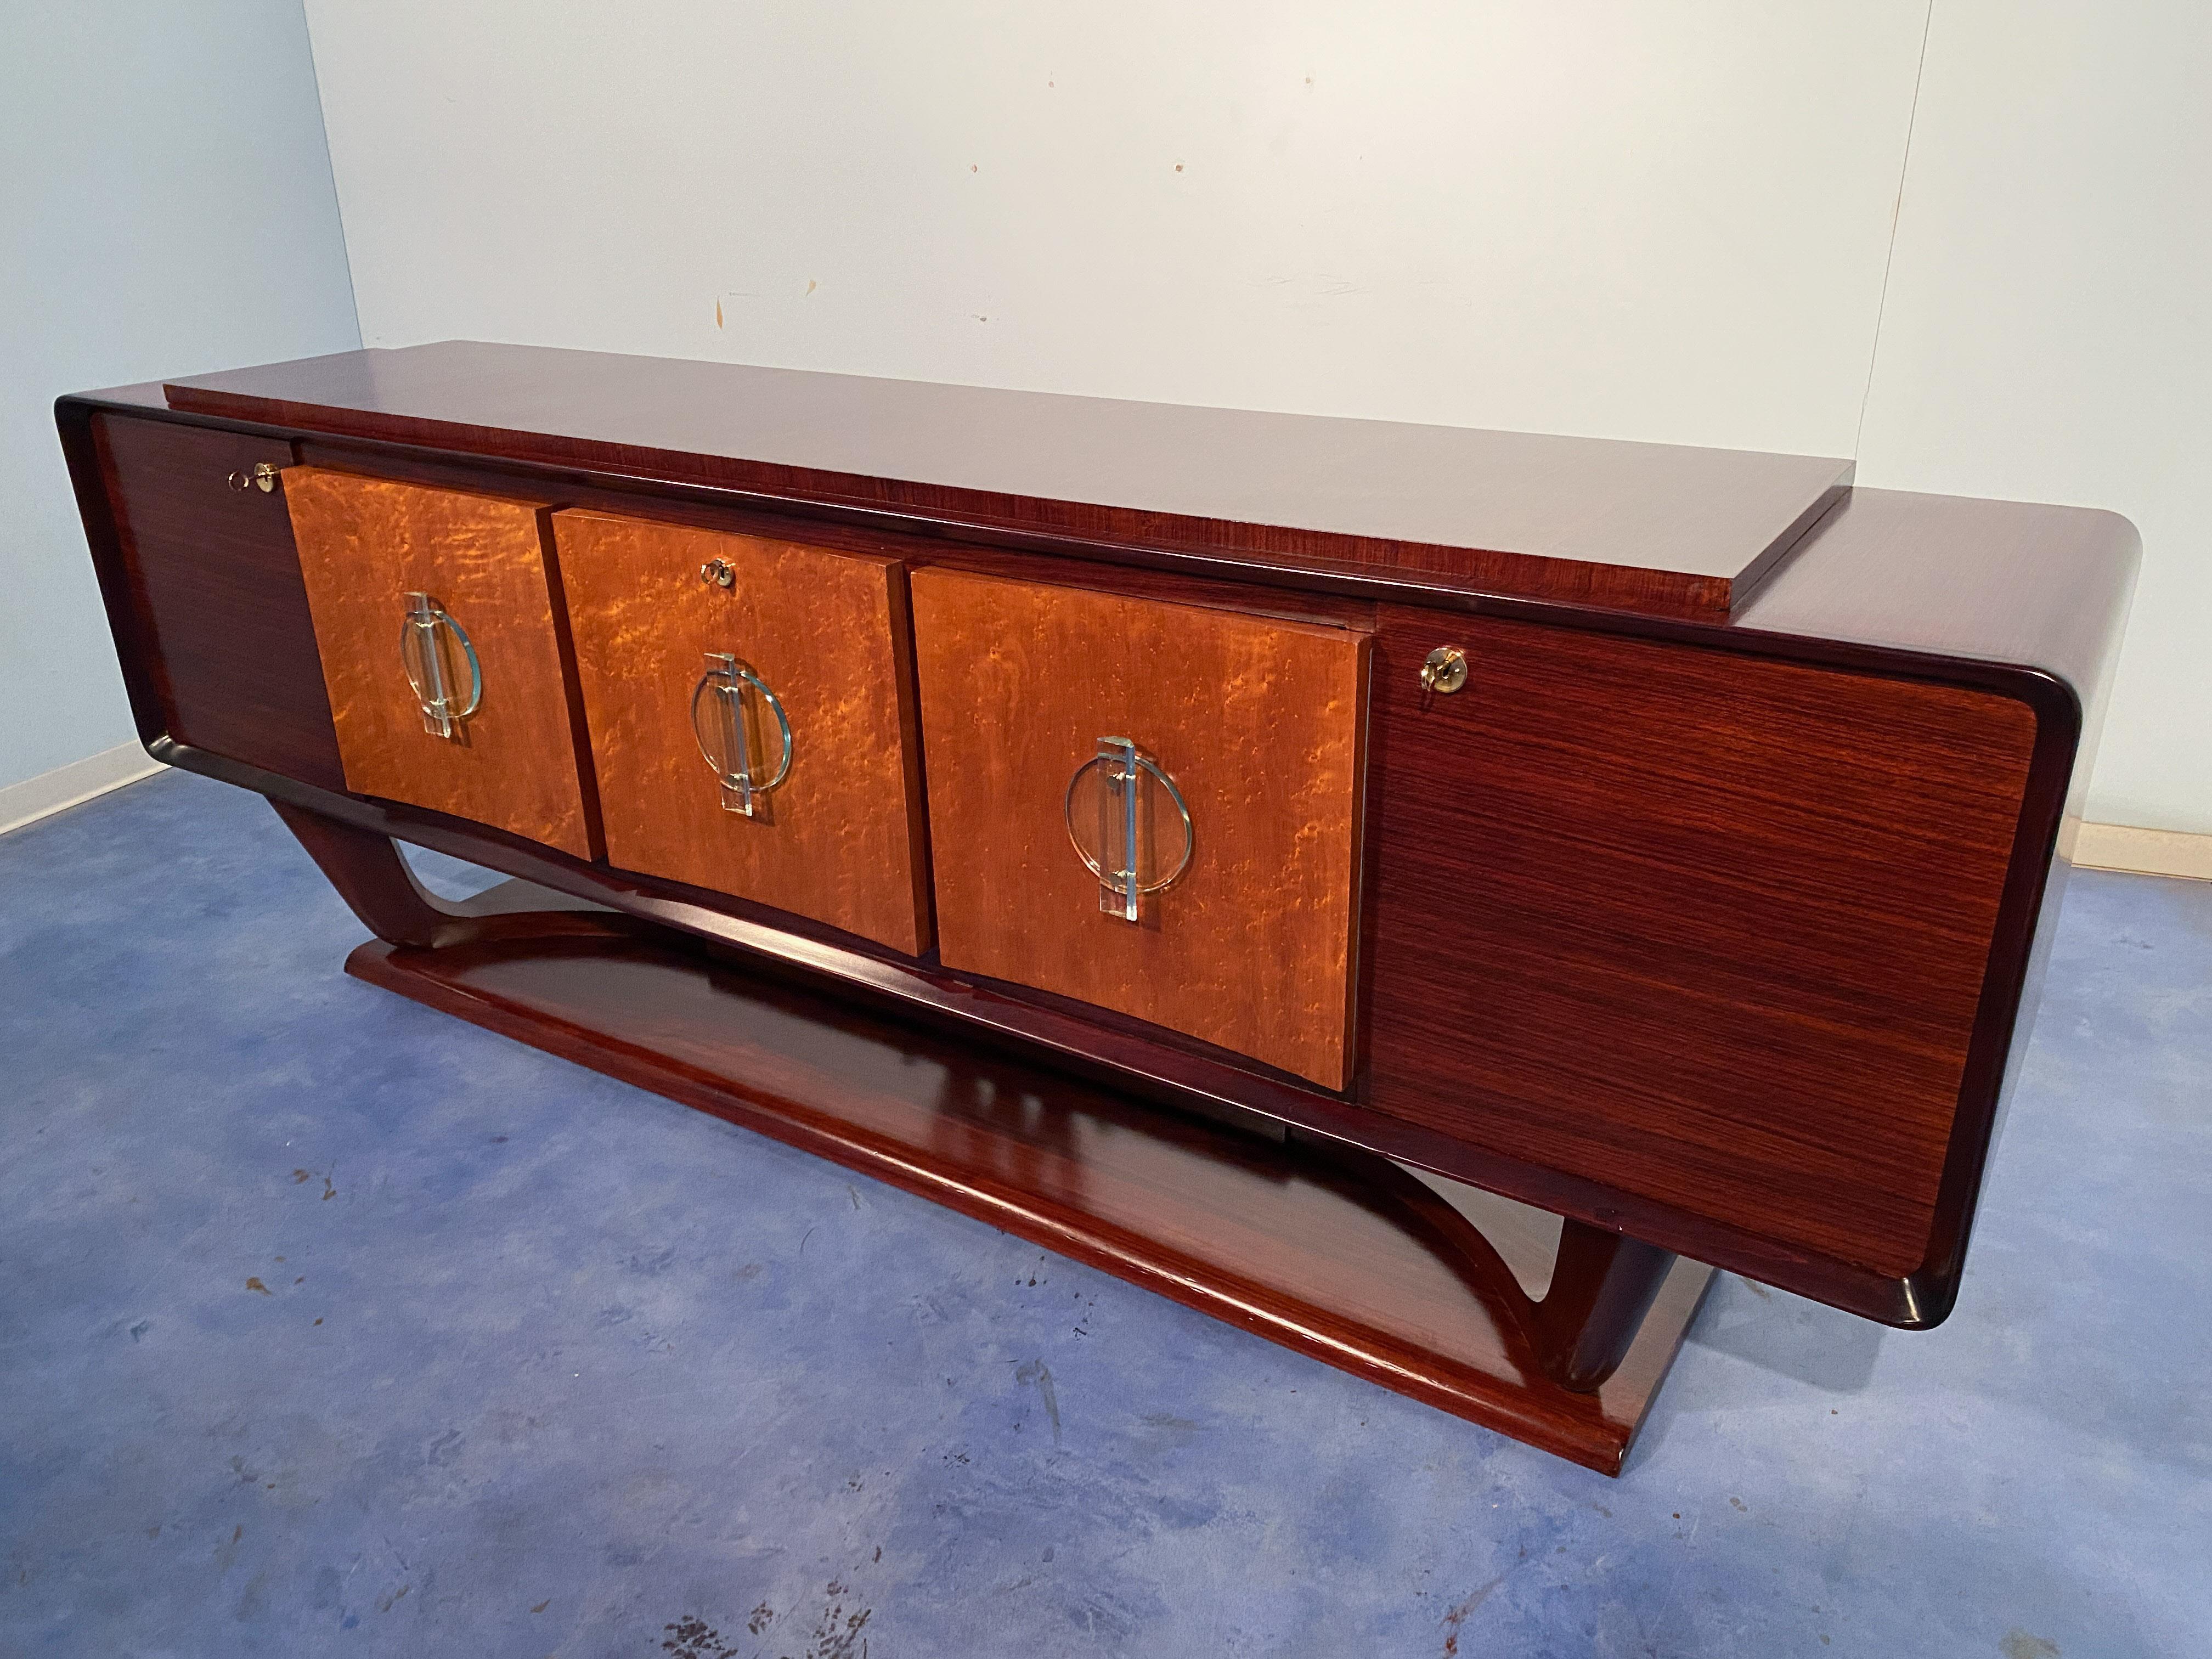 Italian Art Deco Sideboard with Bar Cabinet Attributed to Osvaldo Borsani, 1940s For Sale 3